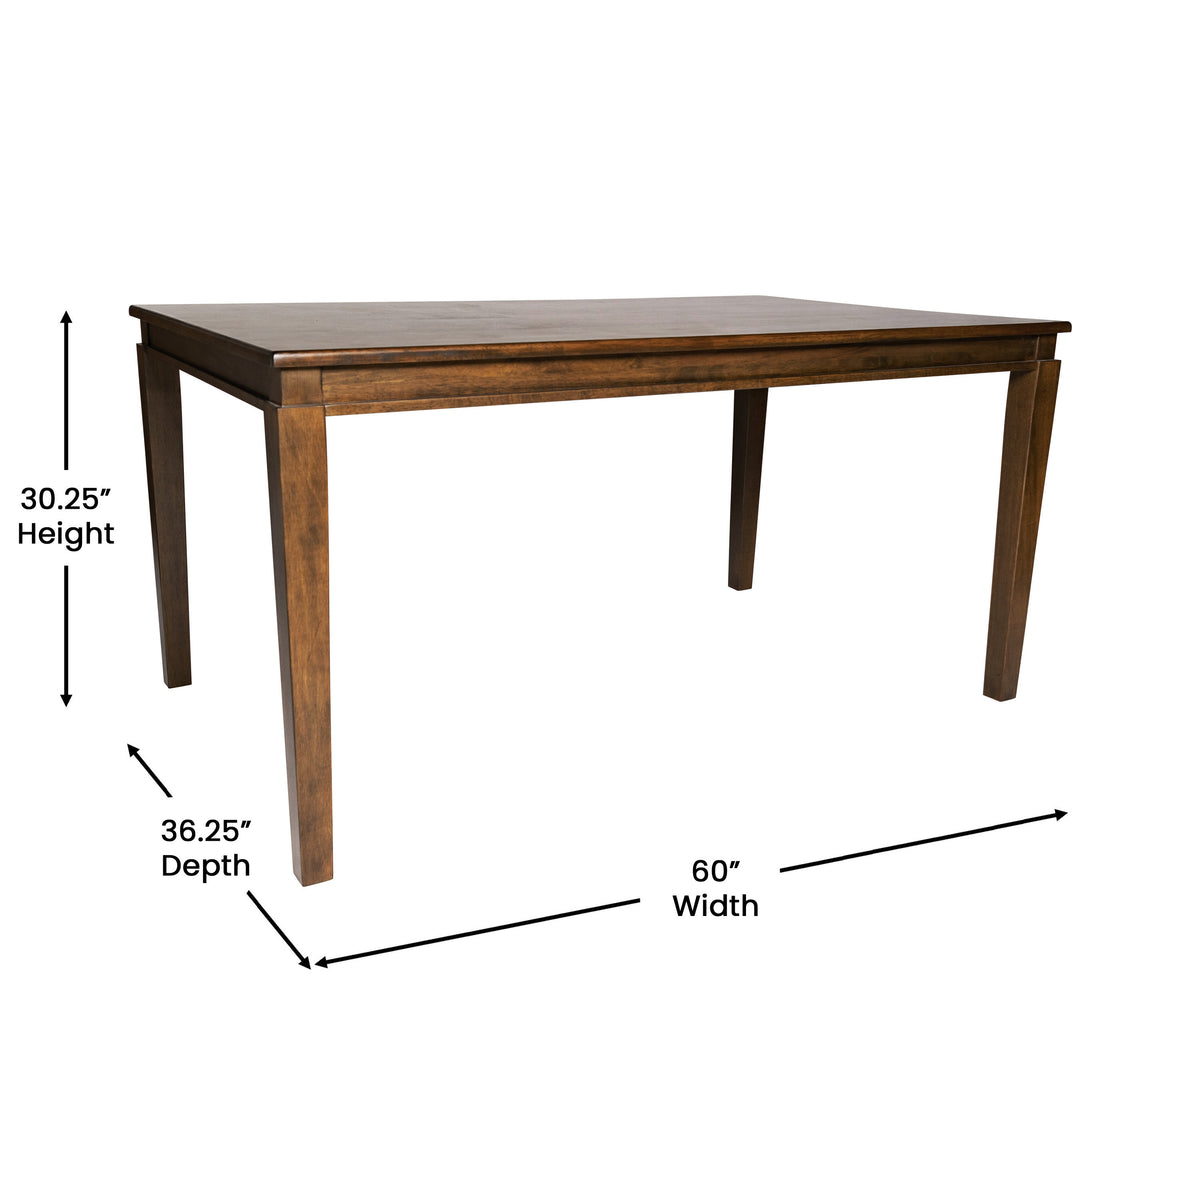 Brown Matte |#| Solid Wood 60 Inch Commercial Grade Dining Table for 4 in Brown Matte Finish